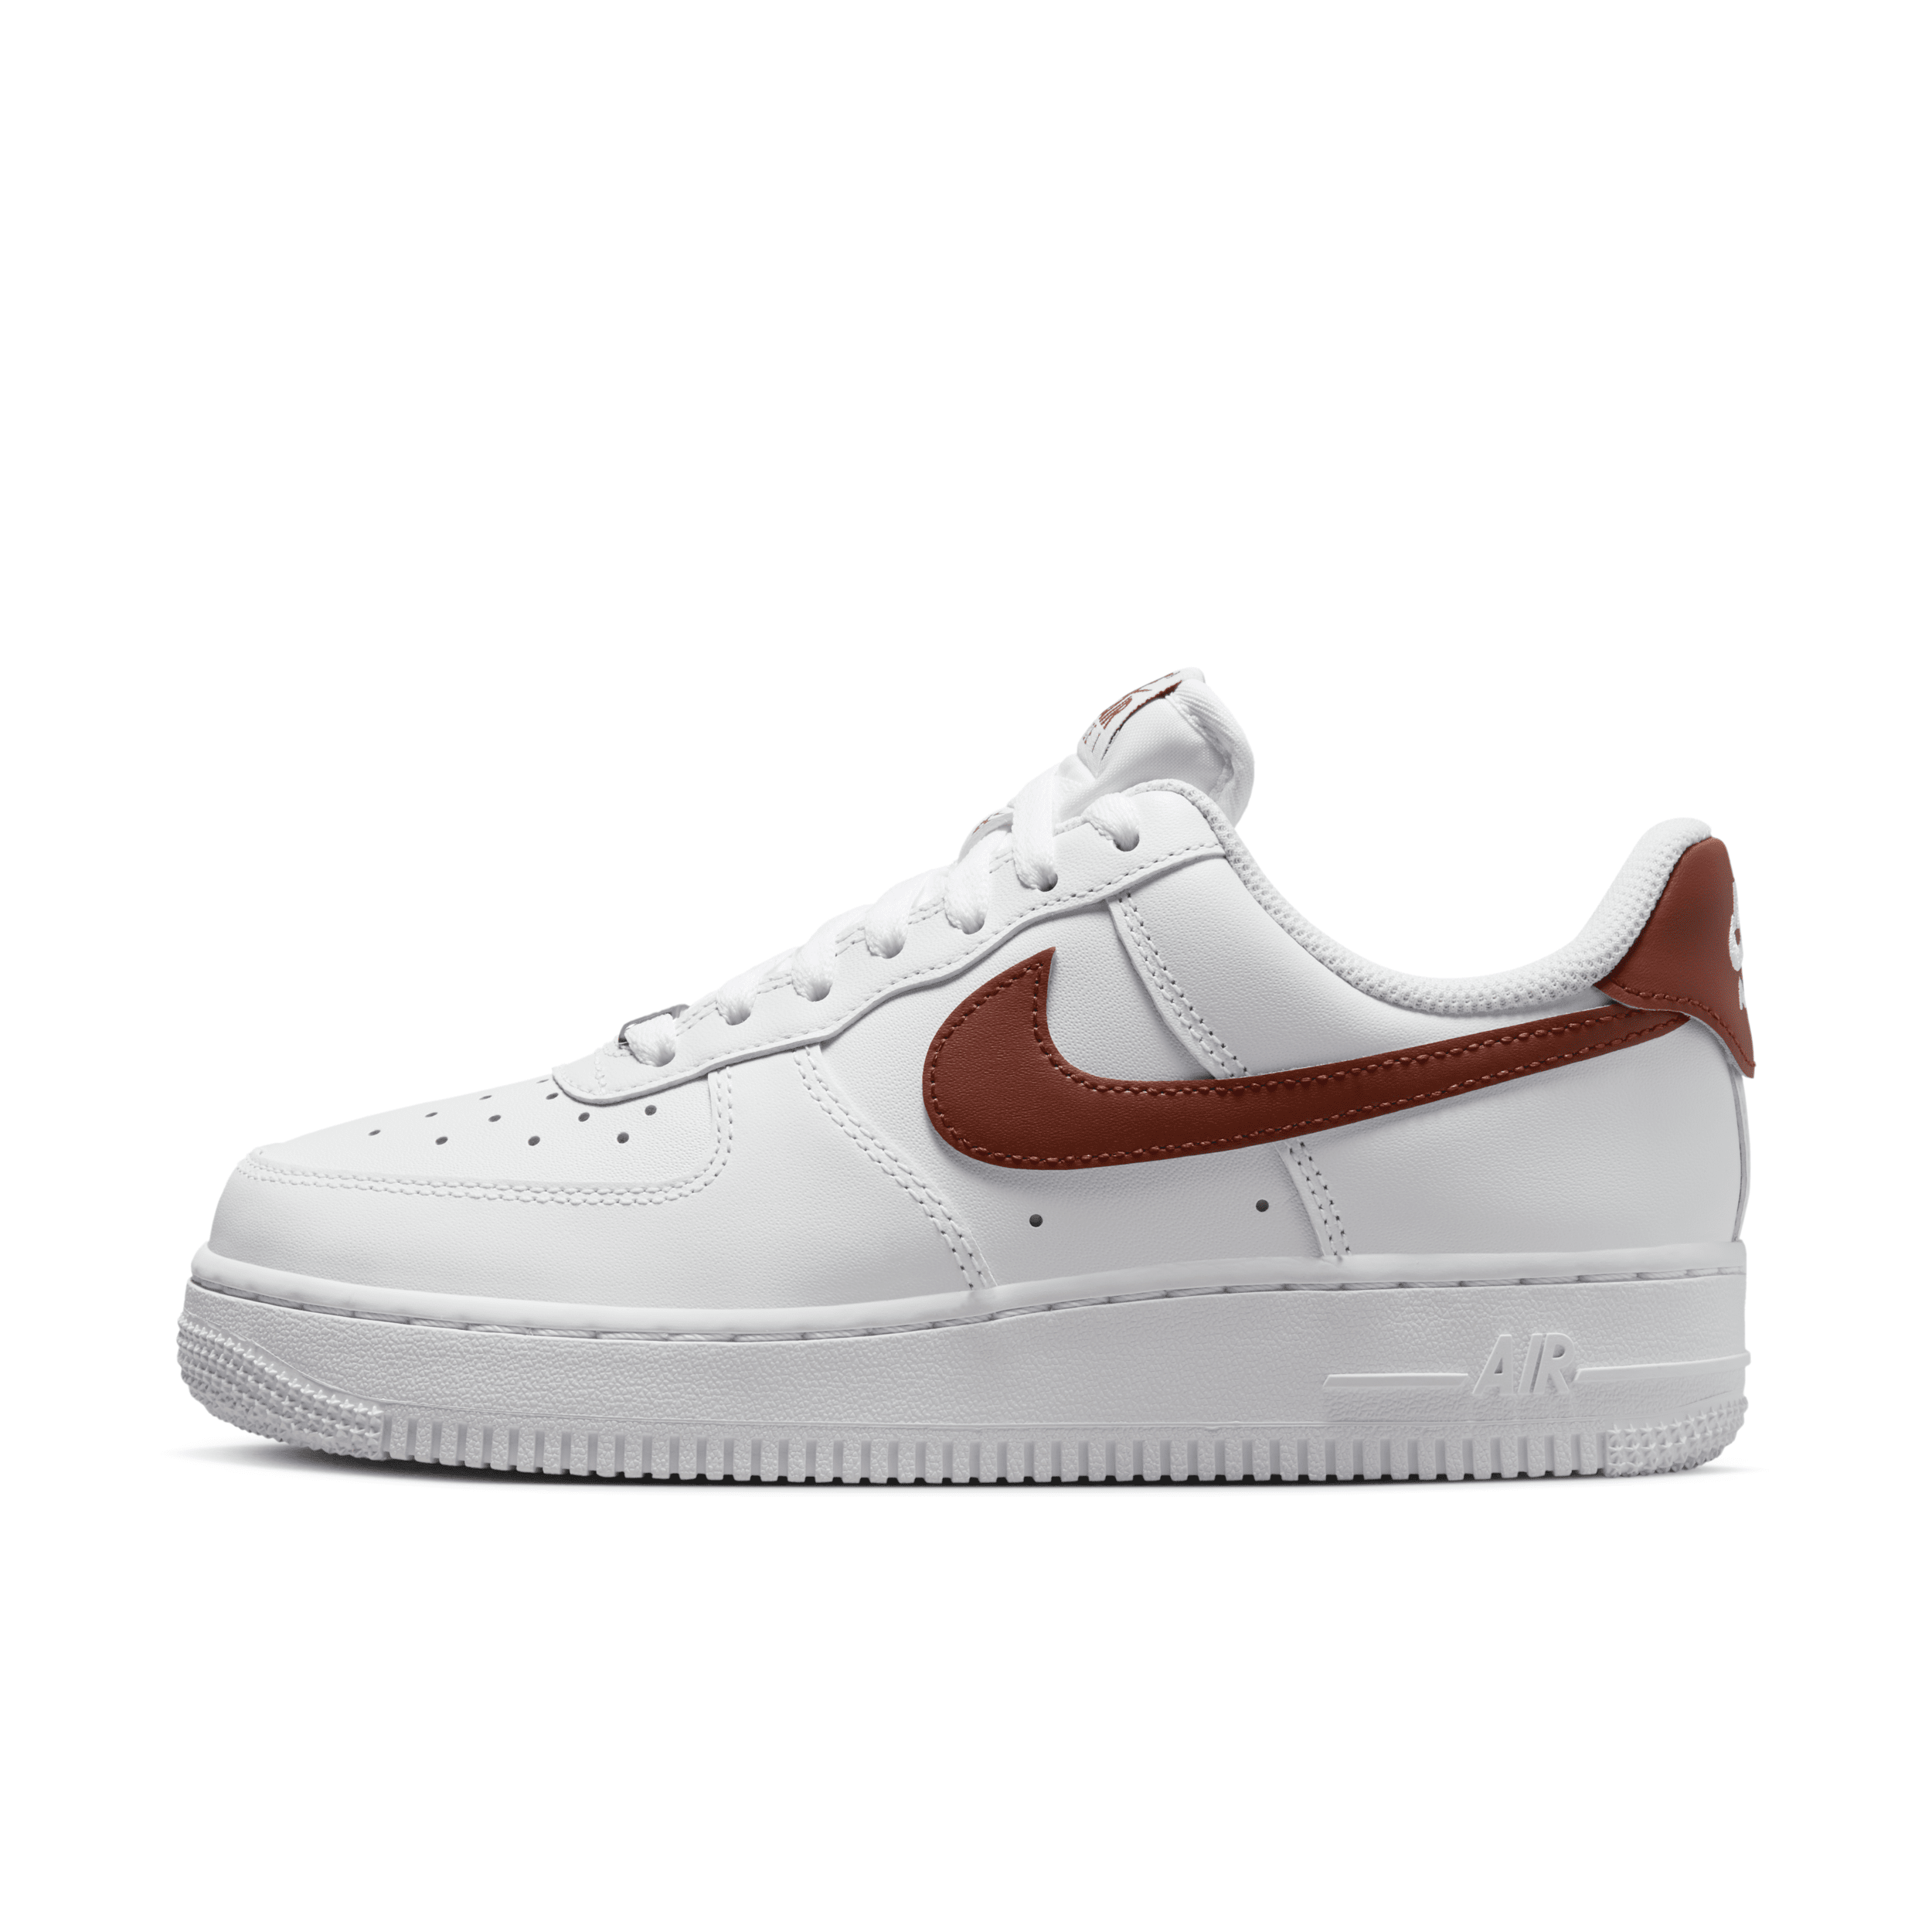 Nike Women's Air Force 1 '07 EasyOn Shoes in White, Size: 6.5 | DX5883-102